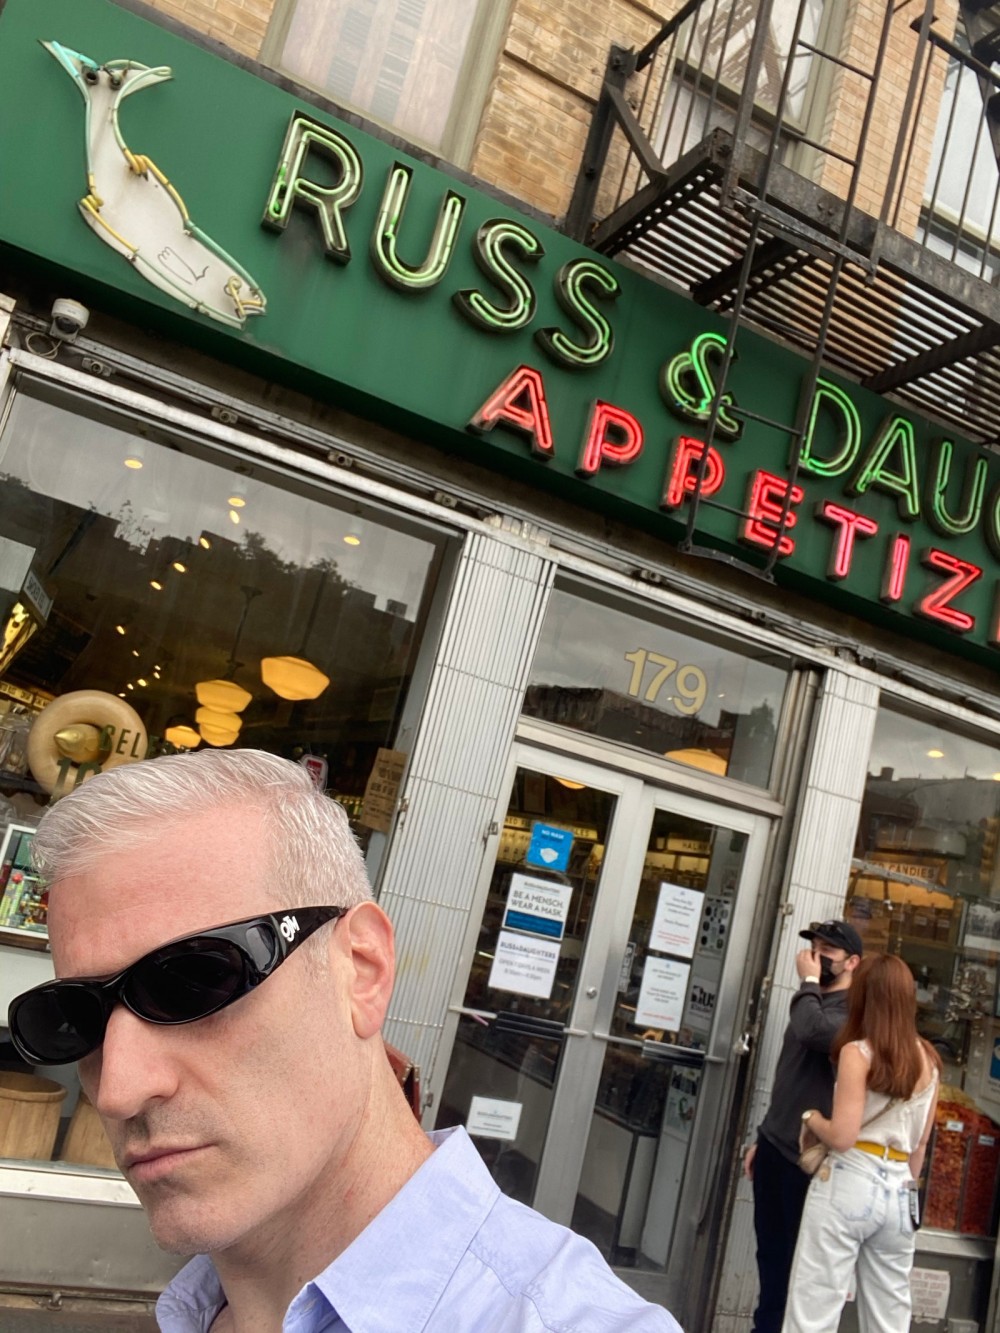 Ottenberg later sent a selfie of himself wearing the OJM Solars at another famous Jewish establishment Russ  Daughters